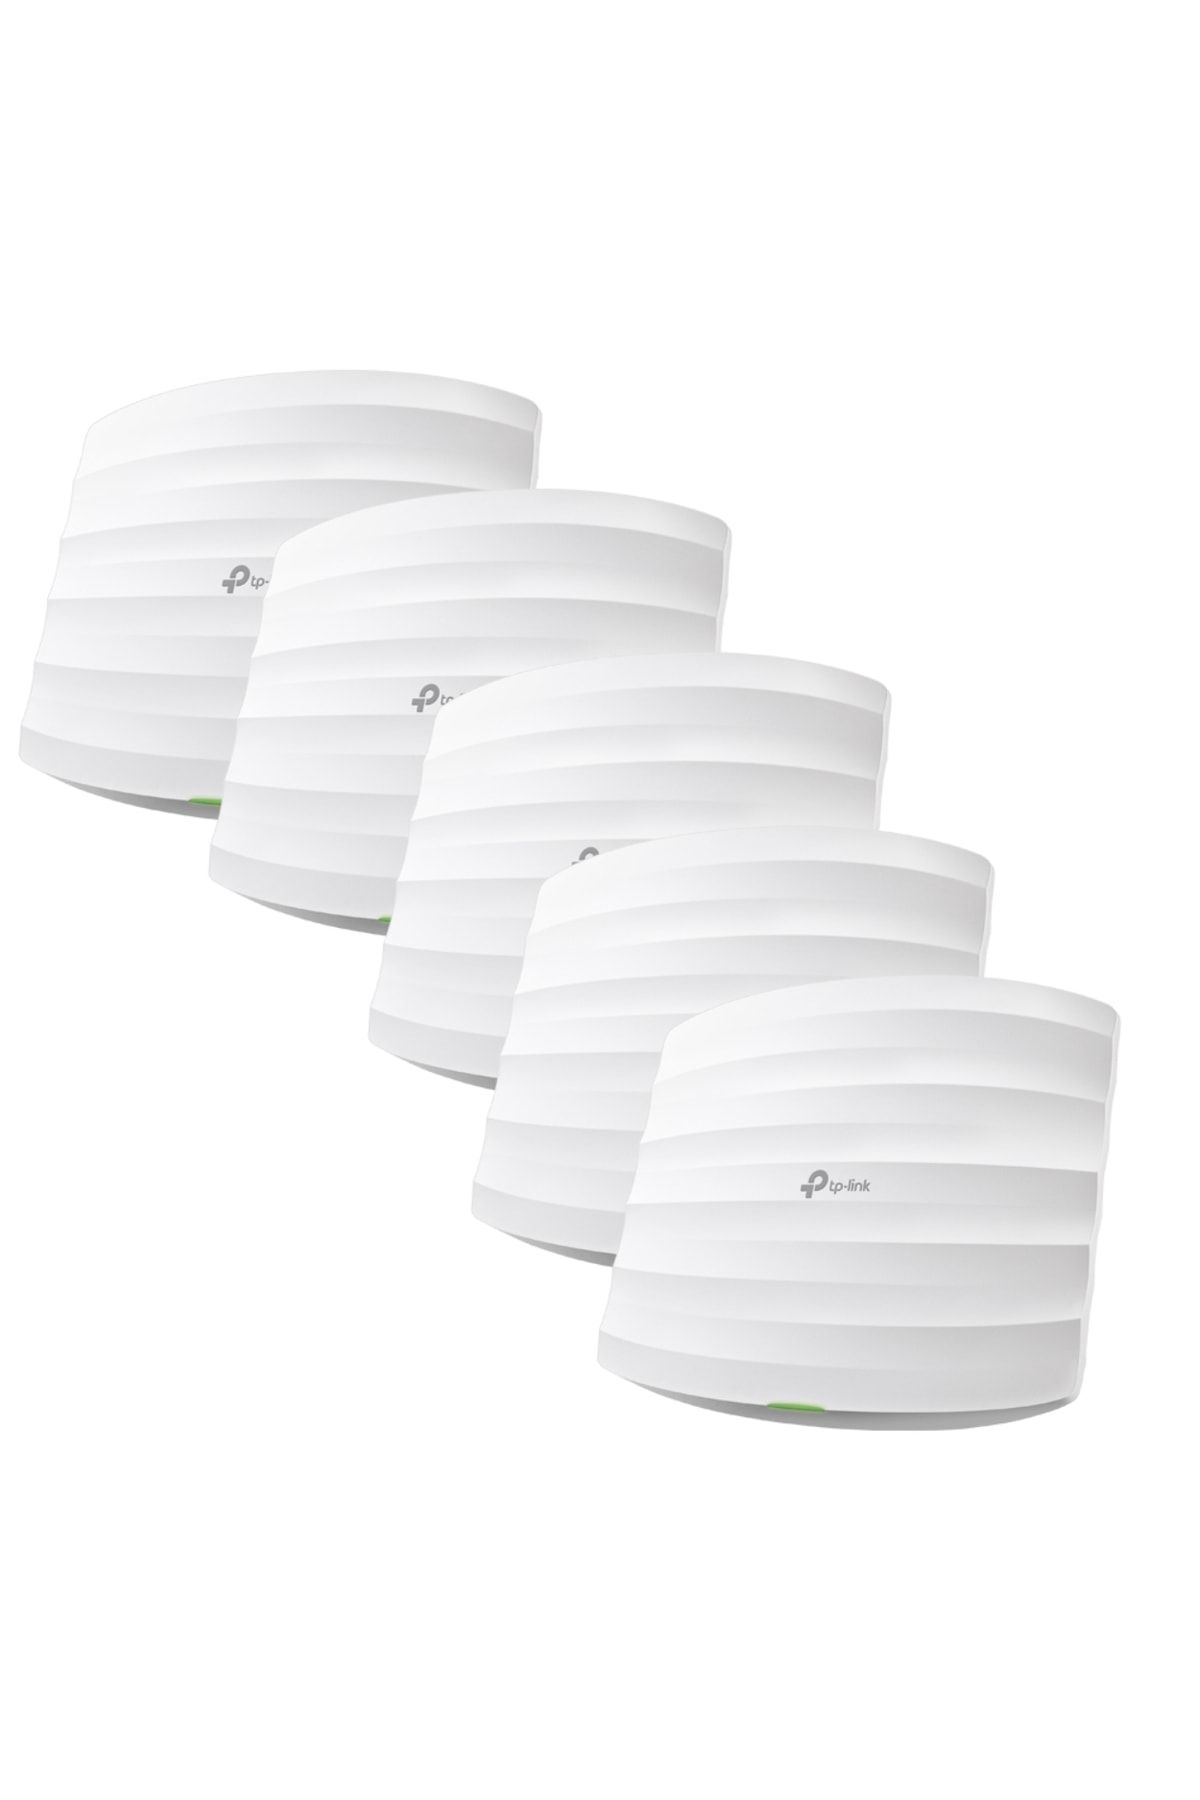 Tp-Link EAP245(5-PACK) AC1750 MU-MIMO DUALBAND INDOOR TAVAN TİPİ ACCESS POINT